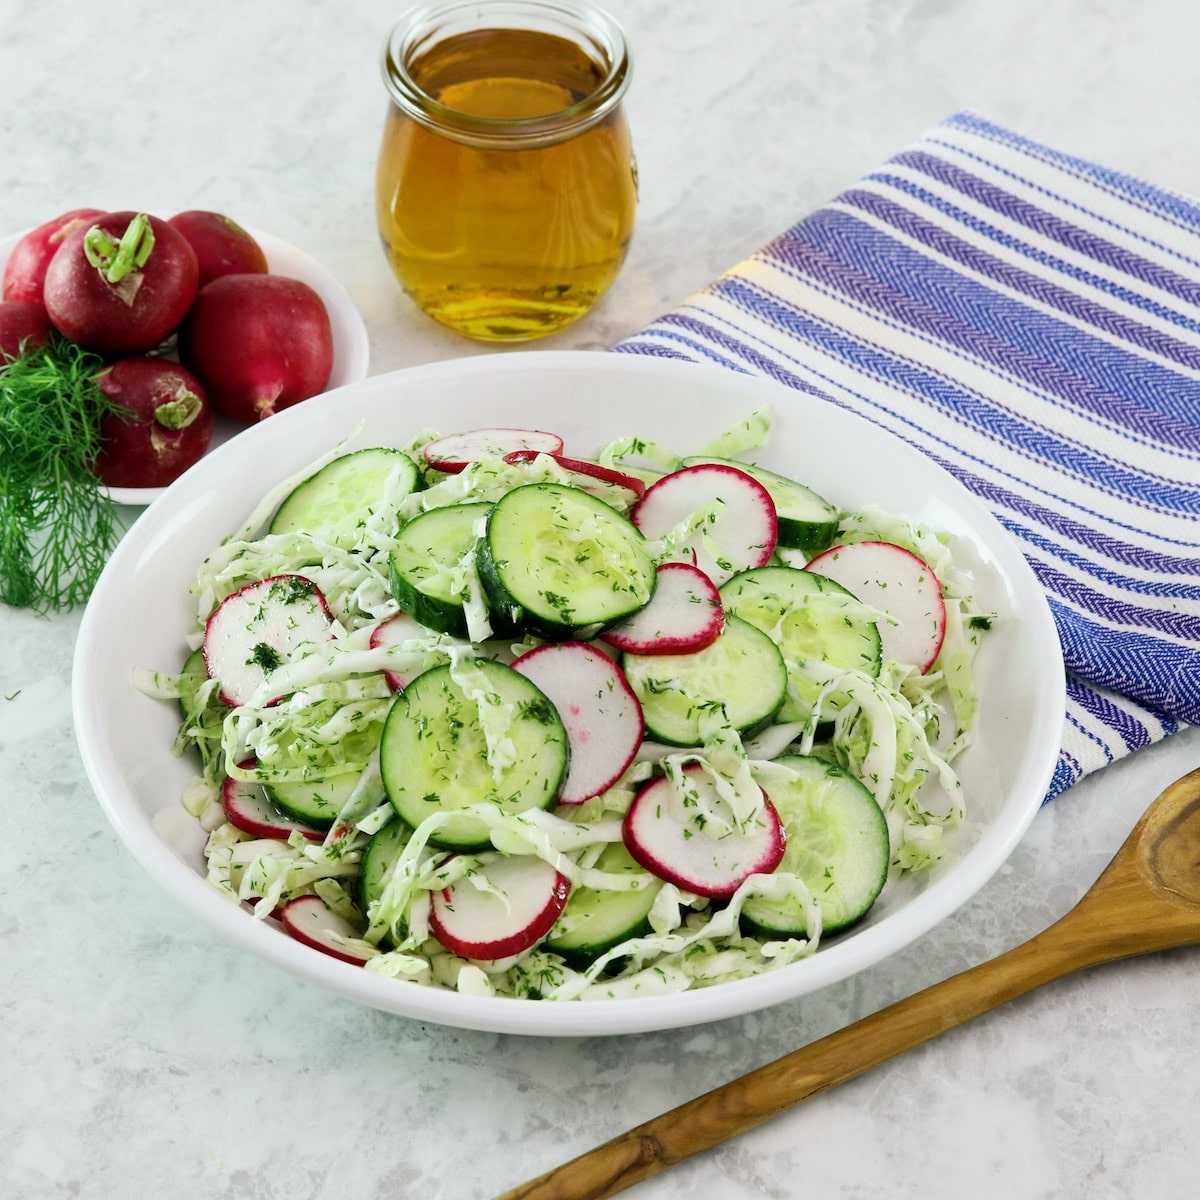 Close up shot of a large bowl filled with crunch pickled salad. A wooden bowl and blue striped napkin sit off to the right side. To the left there is a bunch of fresh radishes.